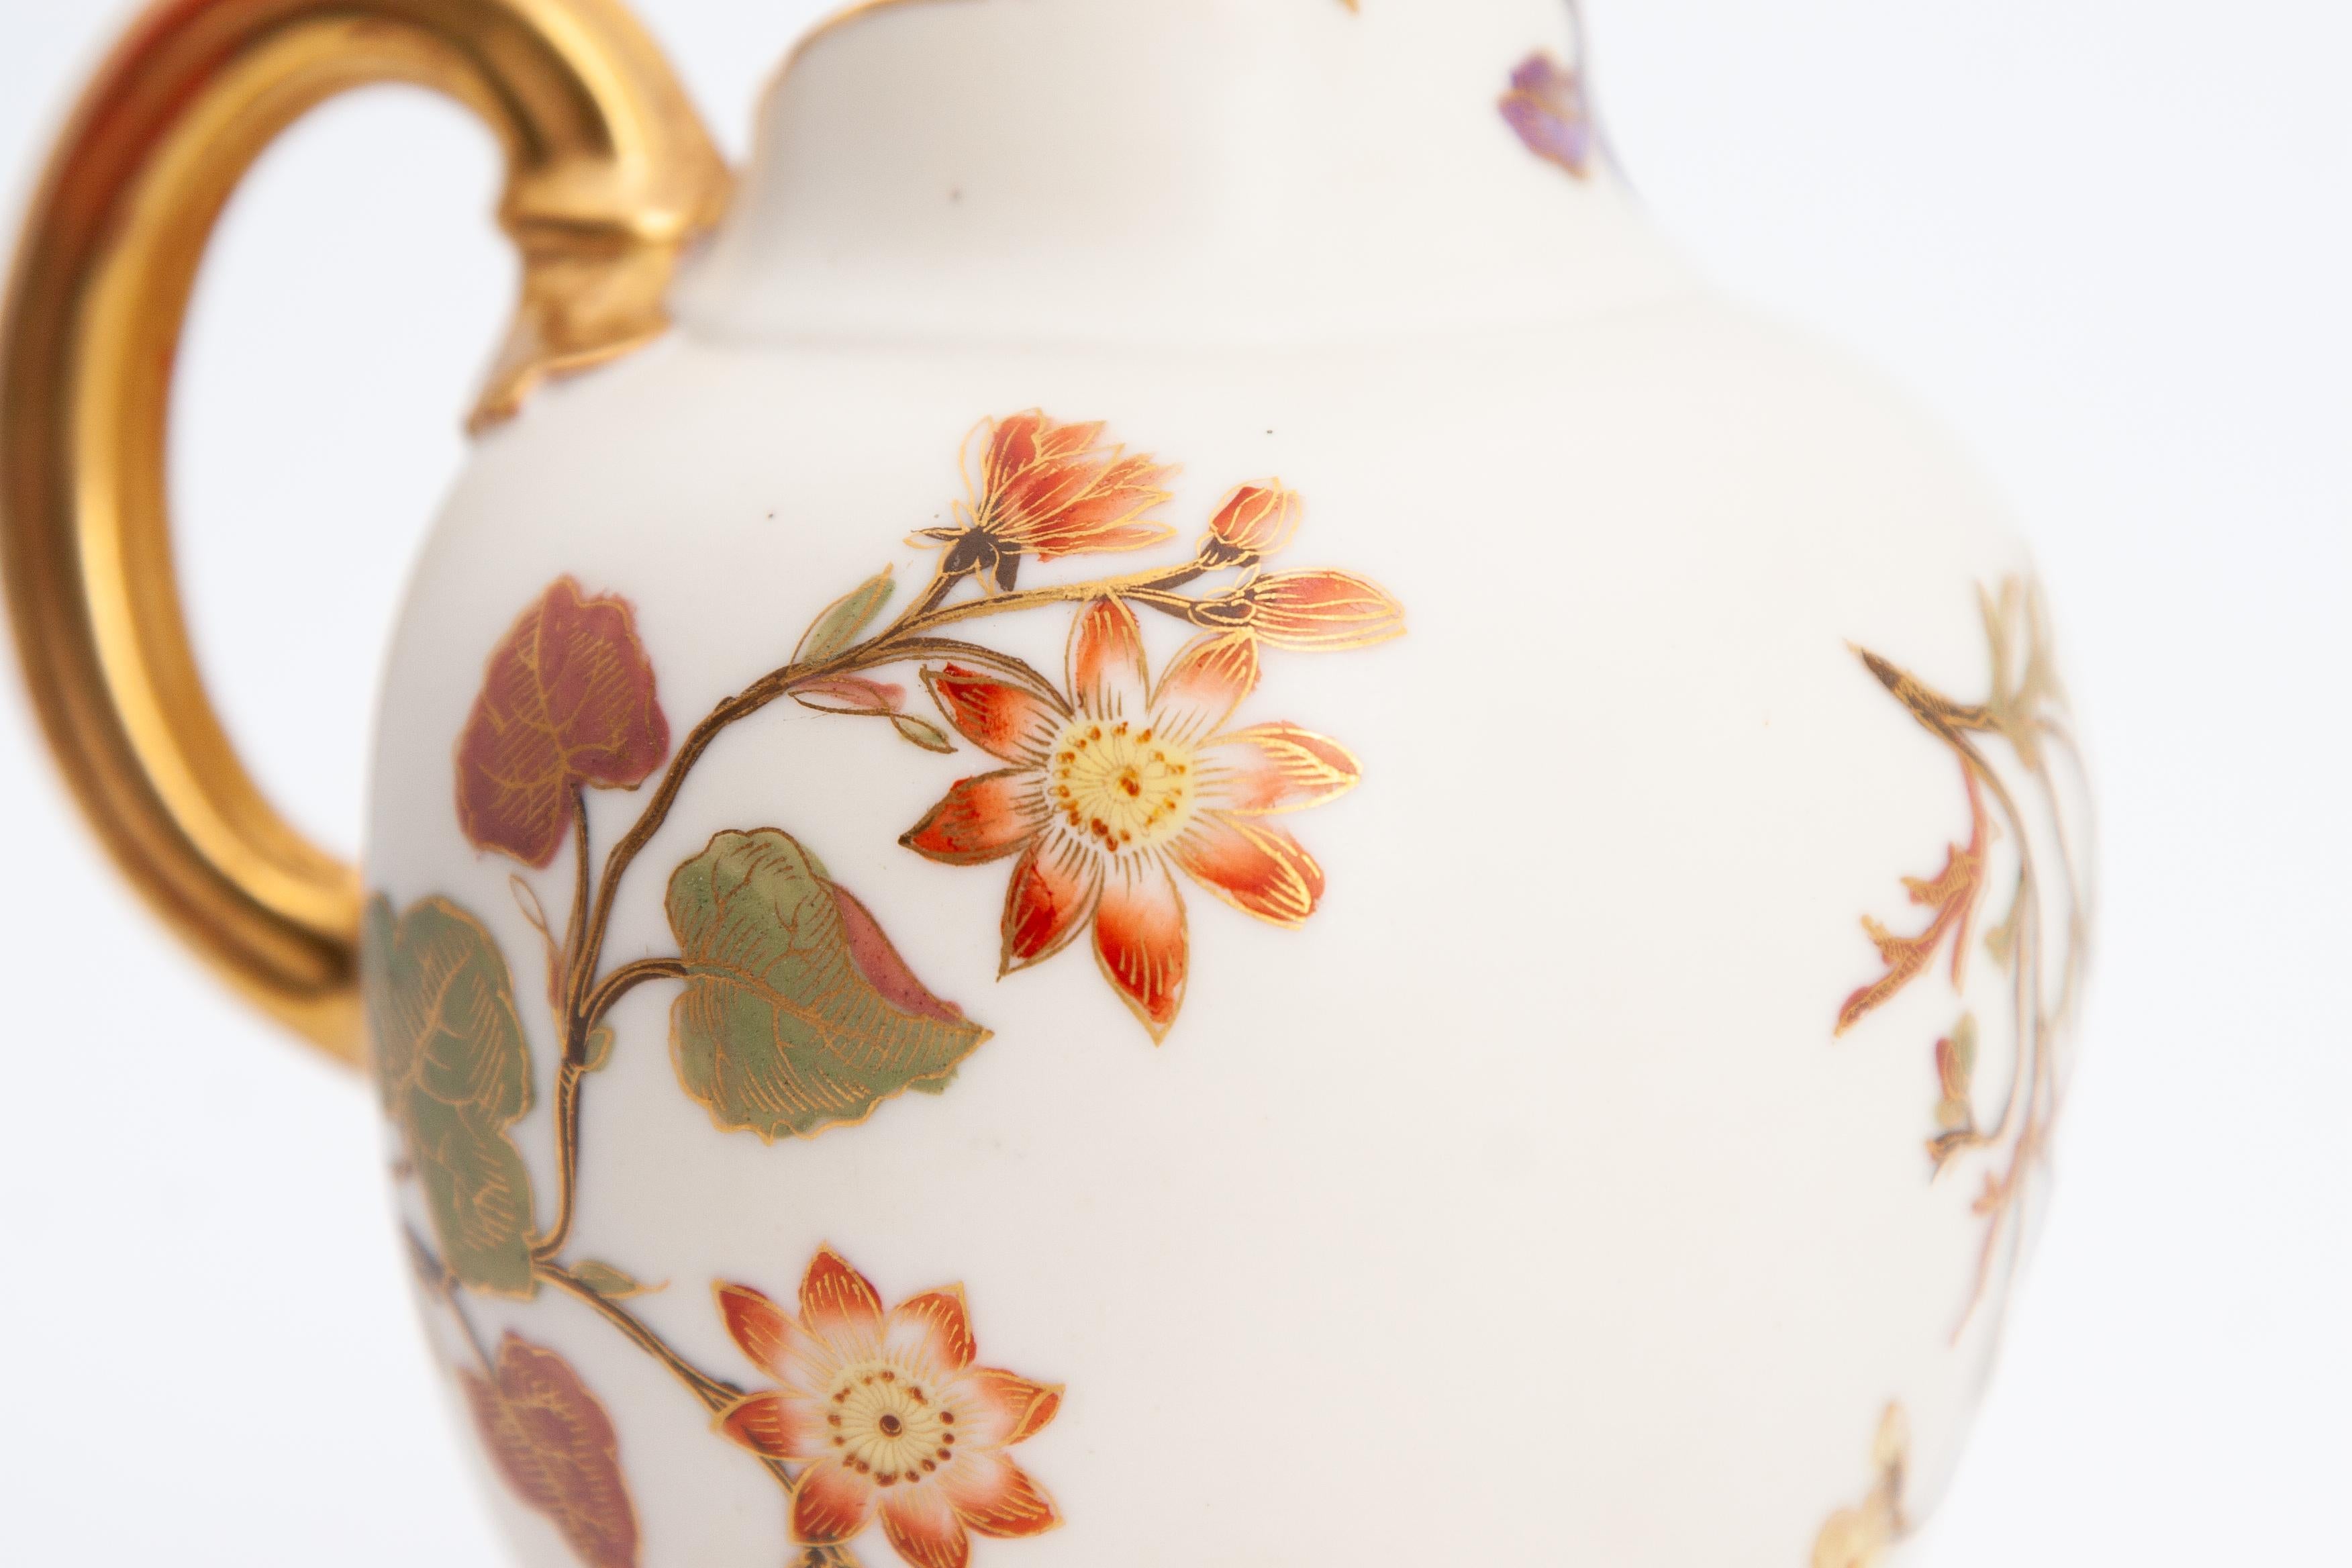 19th Century Royal Worcester Blush Porcelain Pitcher In Excellent Condition For Sale In Fort Lauderdale, FL